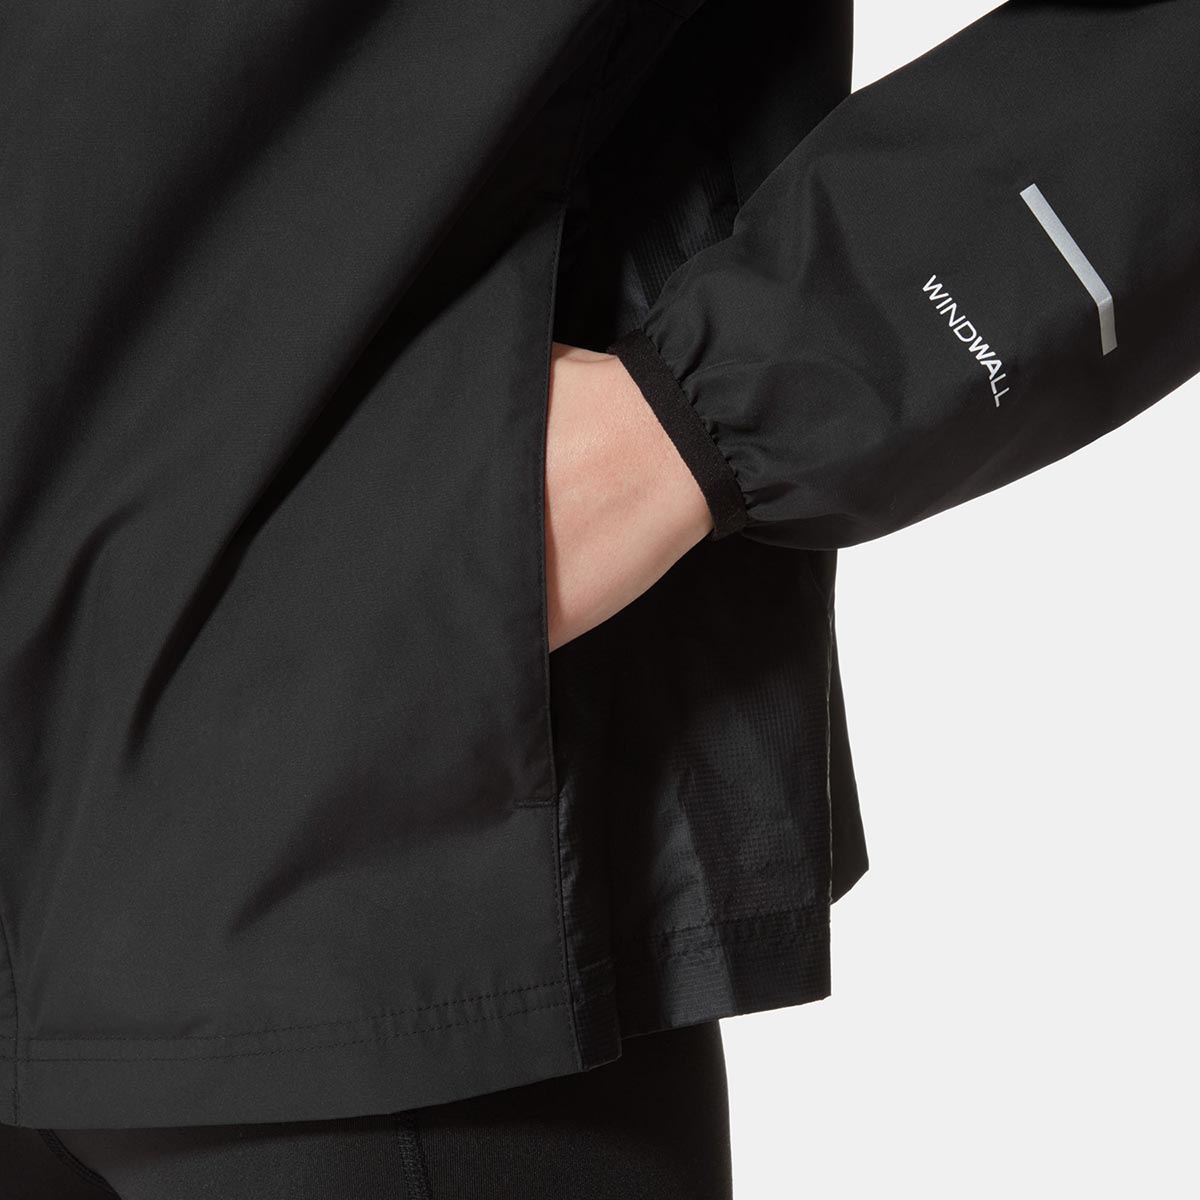 THE NORTH FACE - RUN WIND JACKET